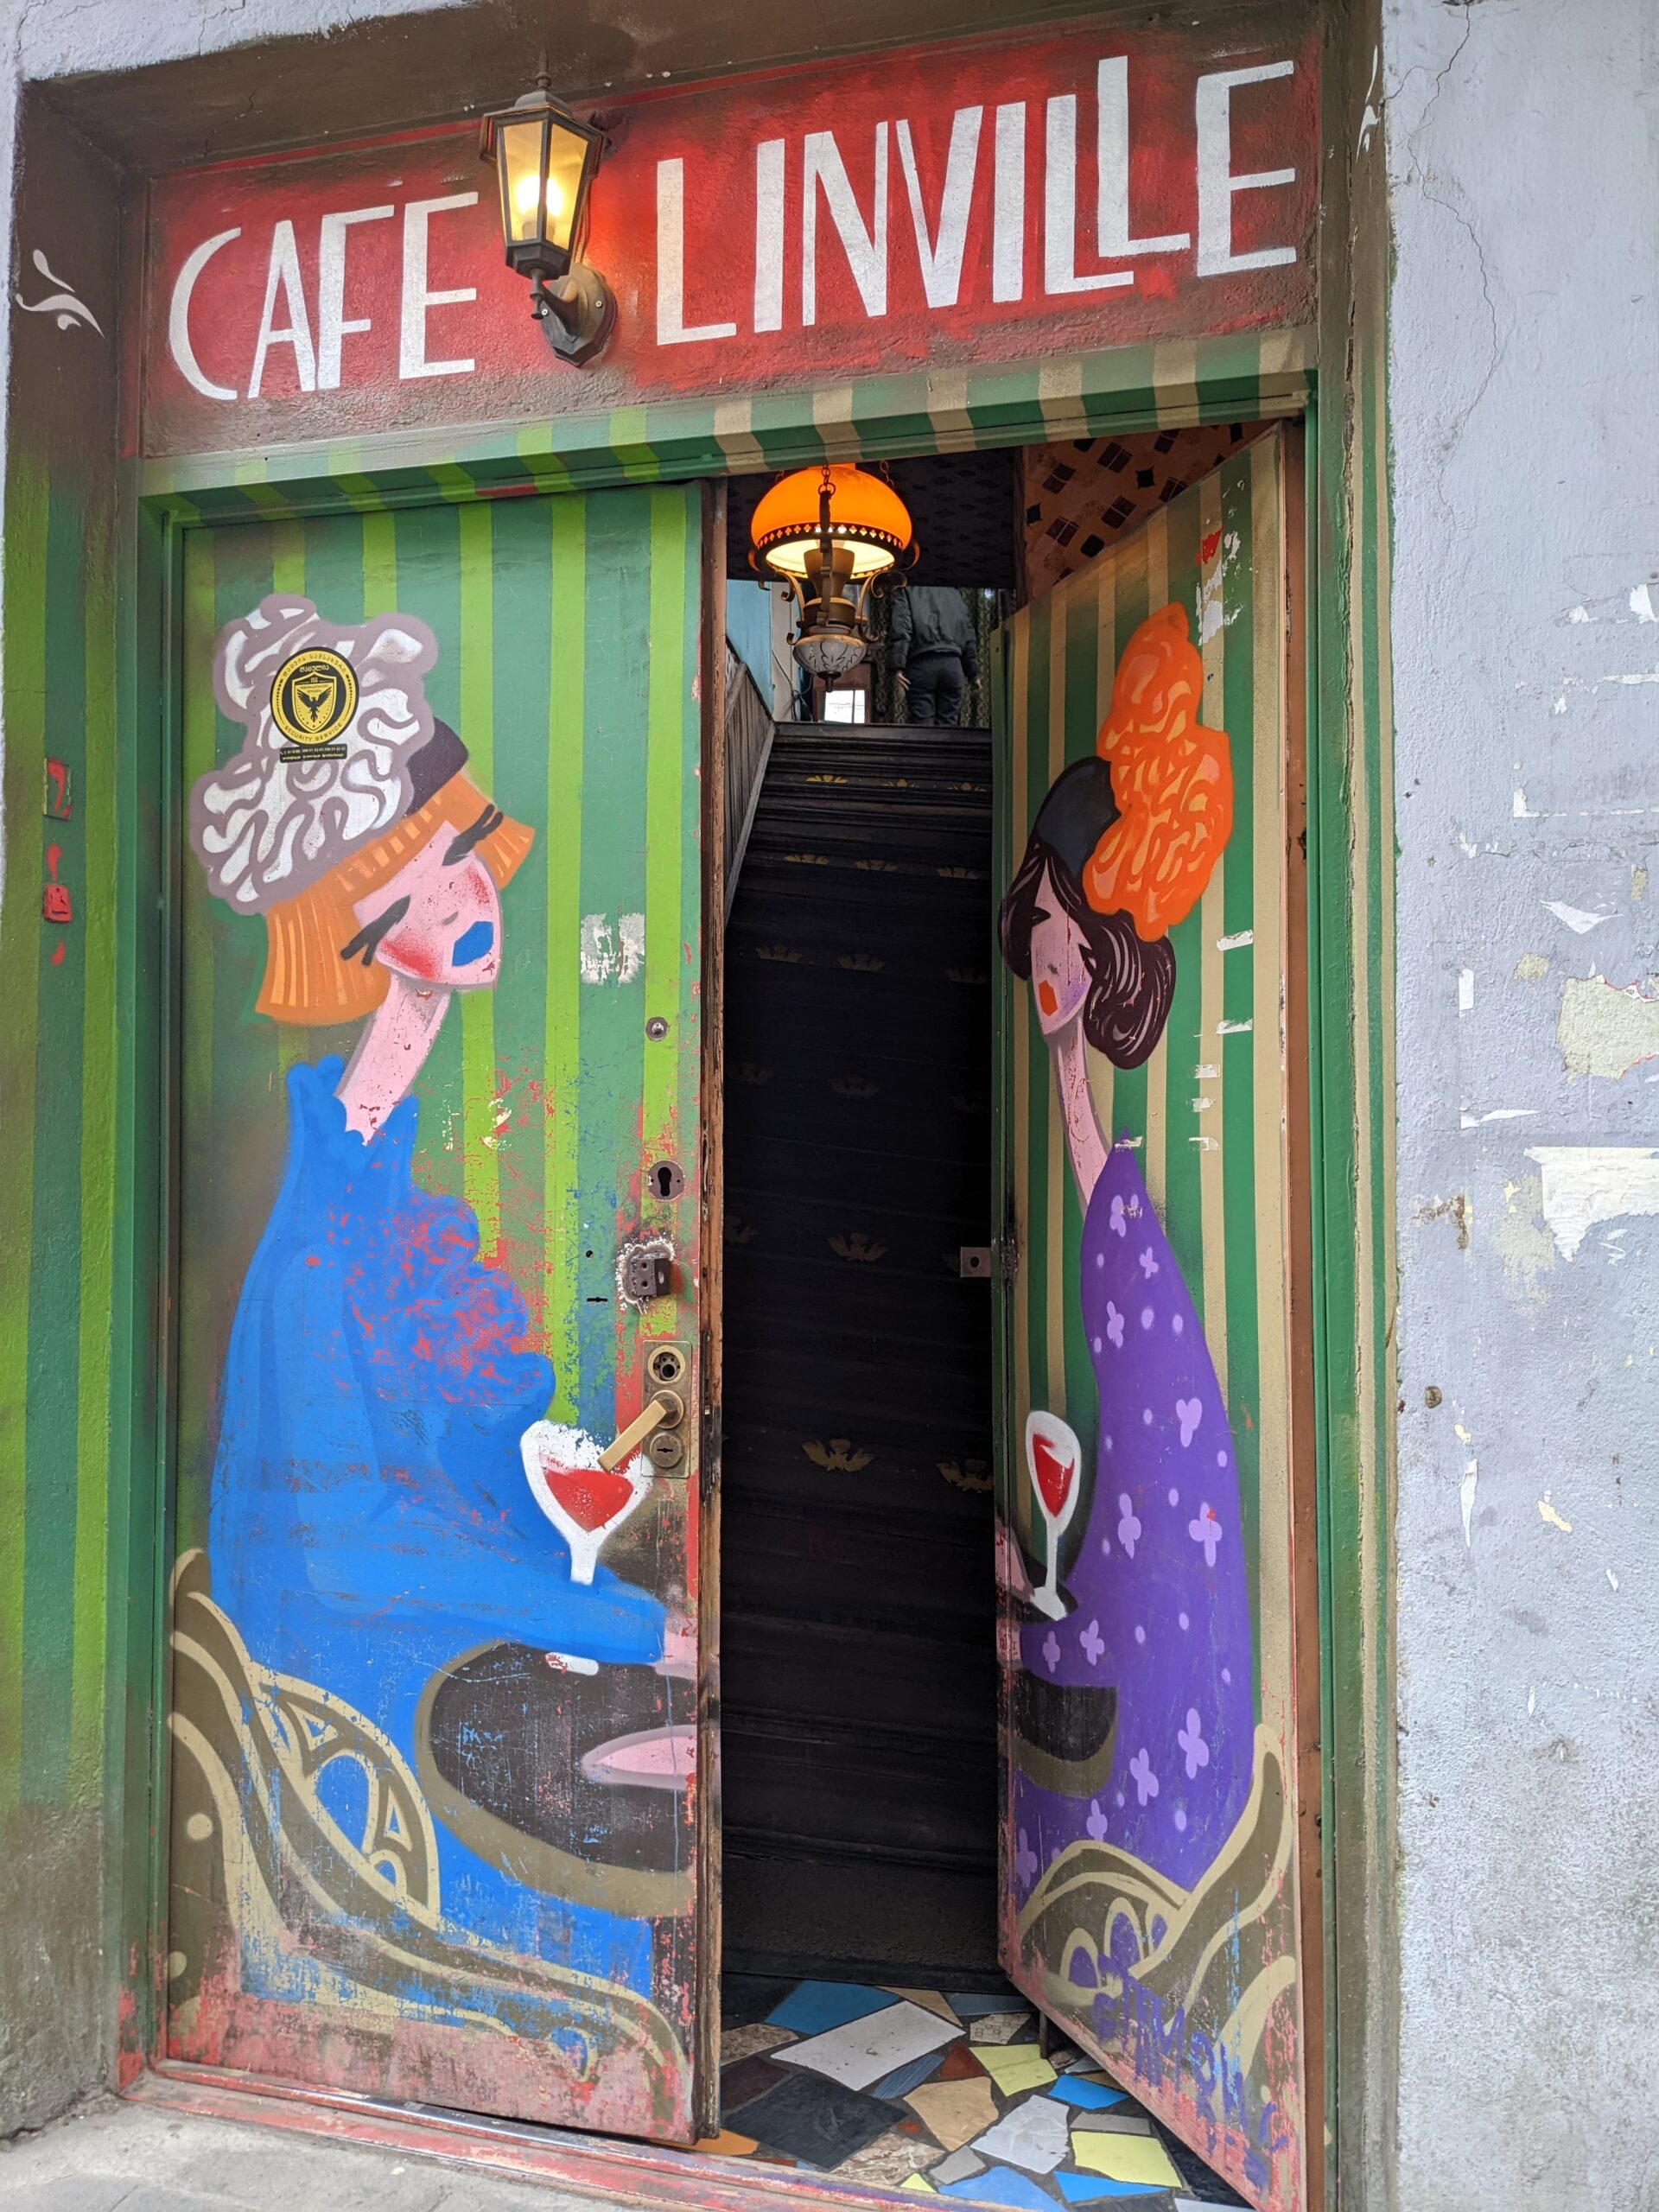 cafe linville, tbilisi